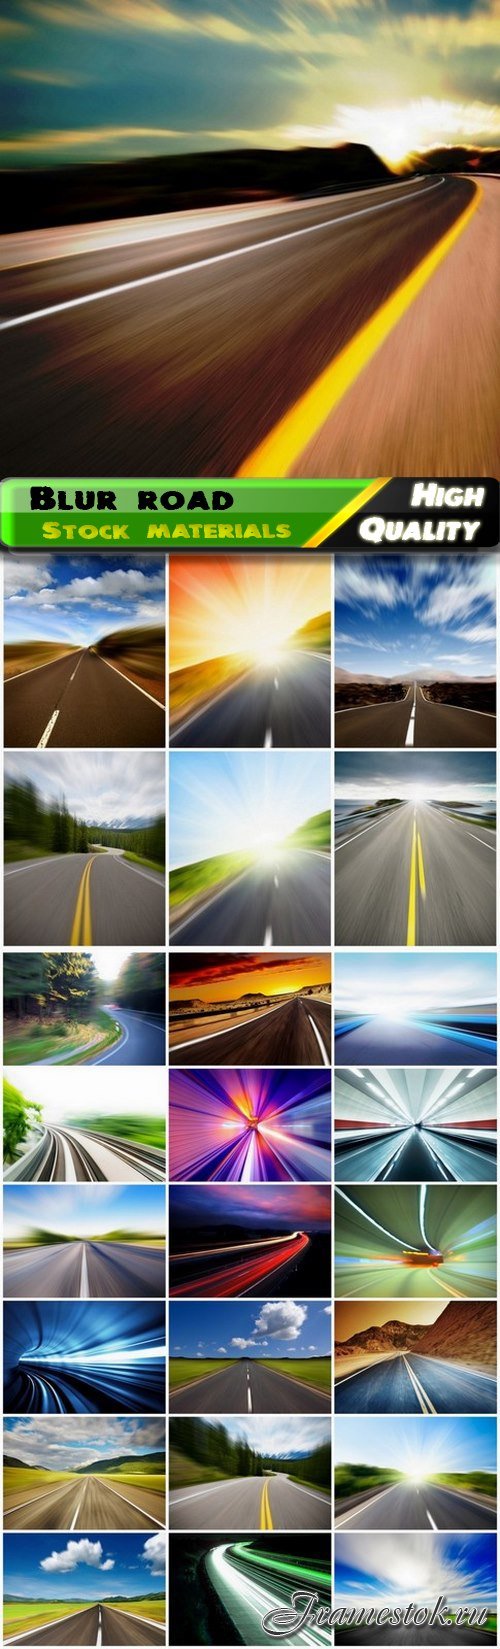 Fast motion on blur road or autobahn and in tunnel - 25 HQ Jpg